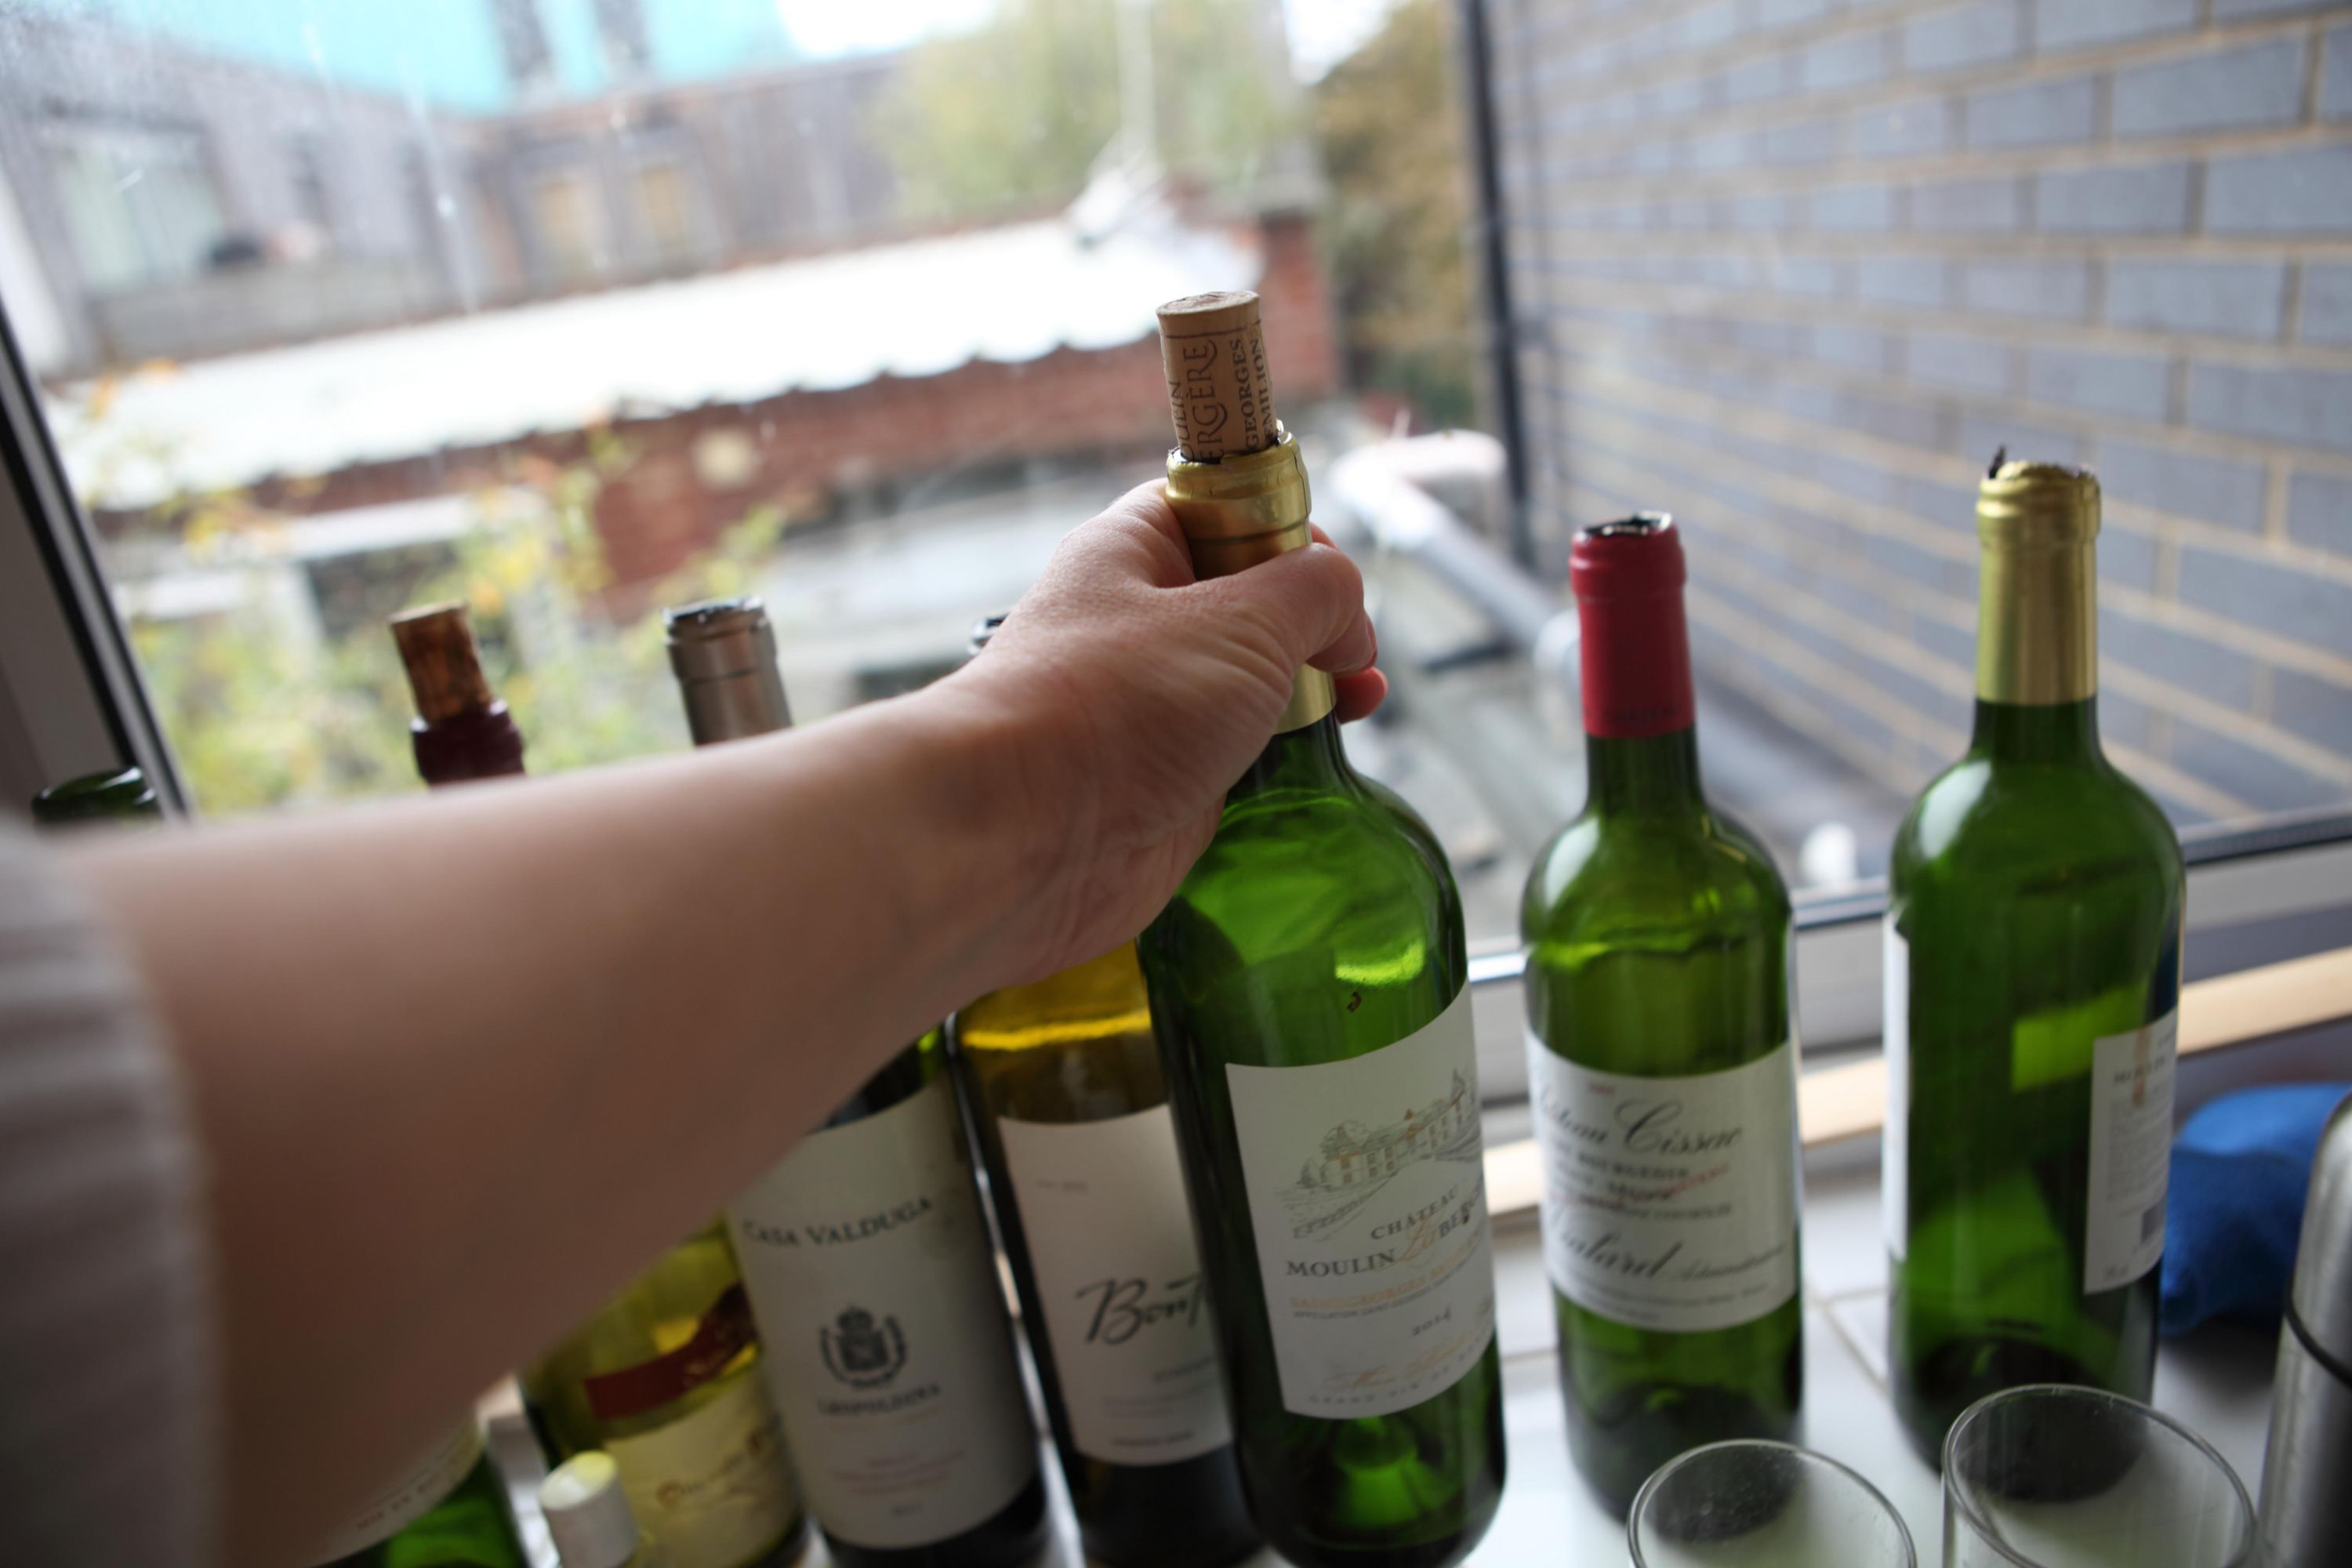 A hand places an empty wine bottle with the row of other empty wine bottles